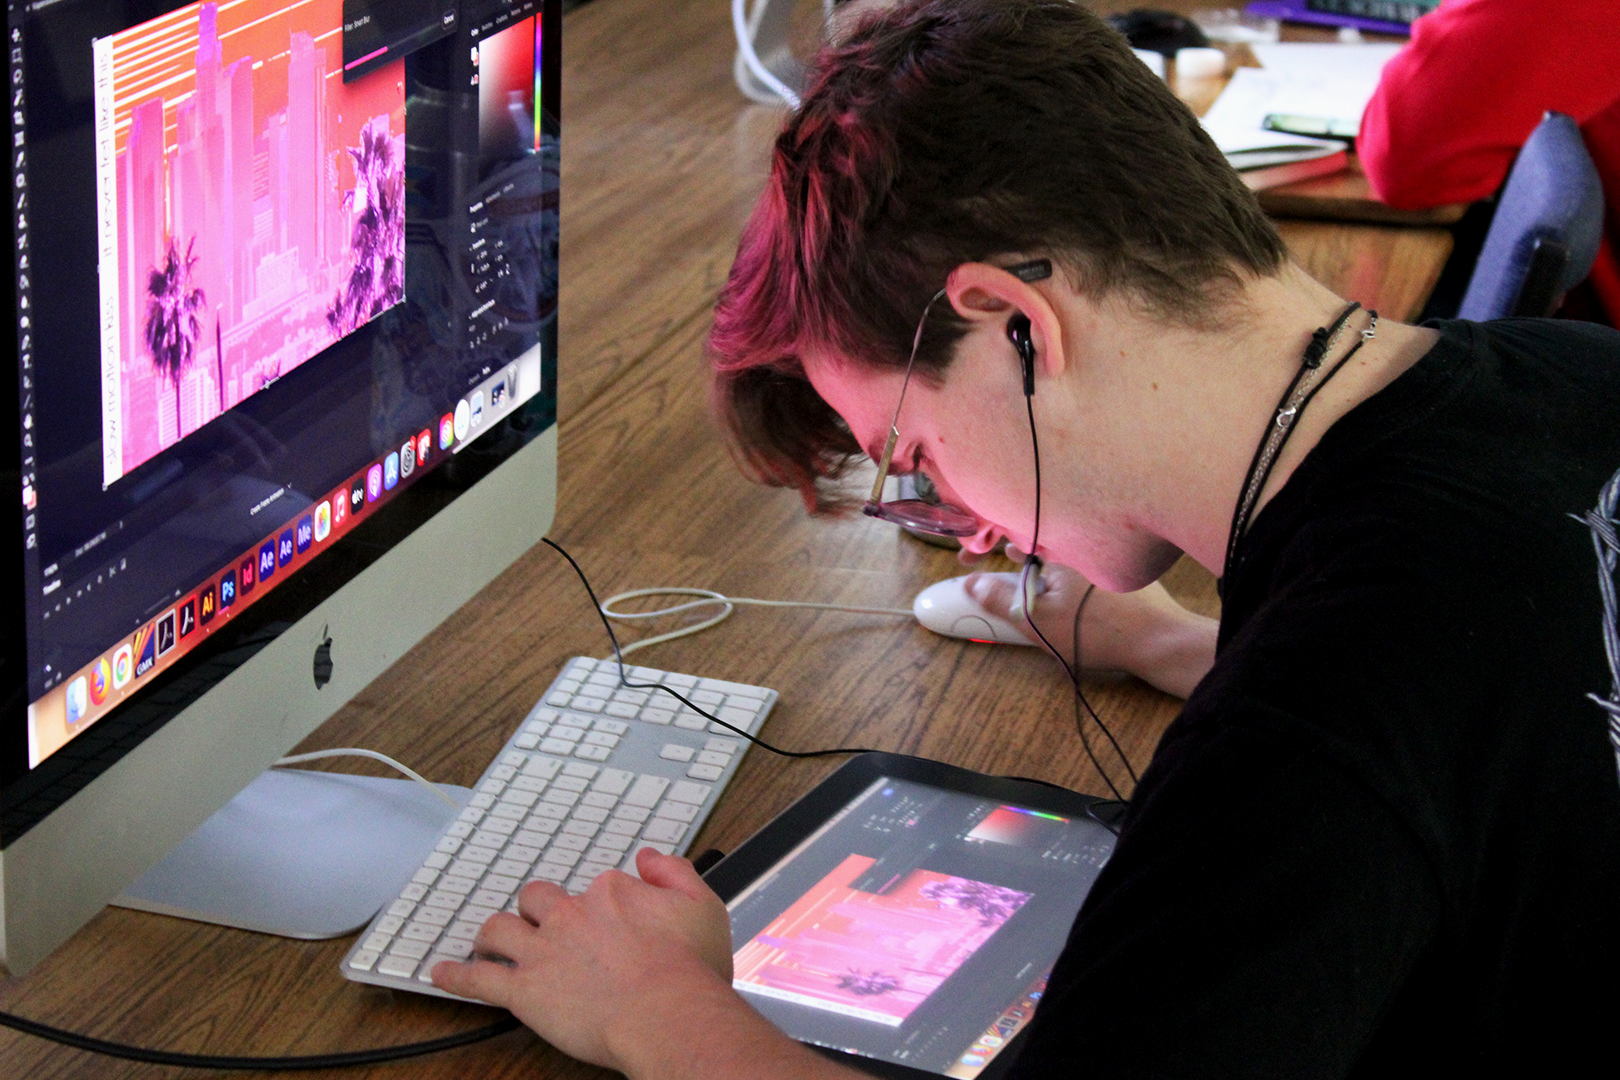 Art student creating a design on a computer